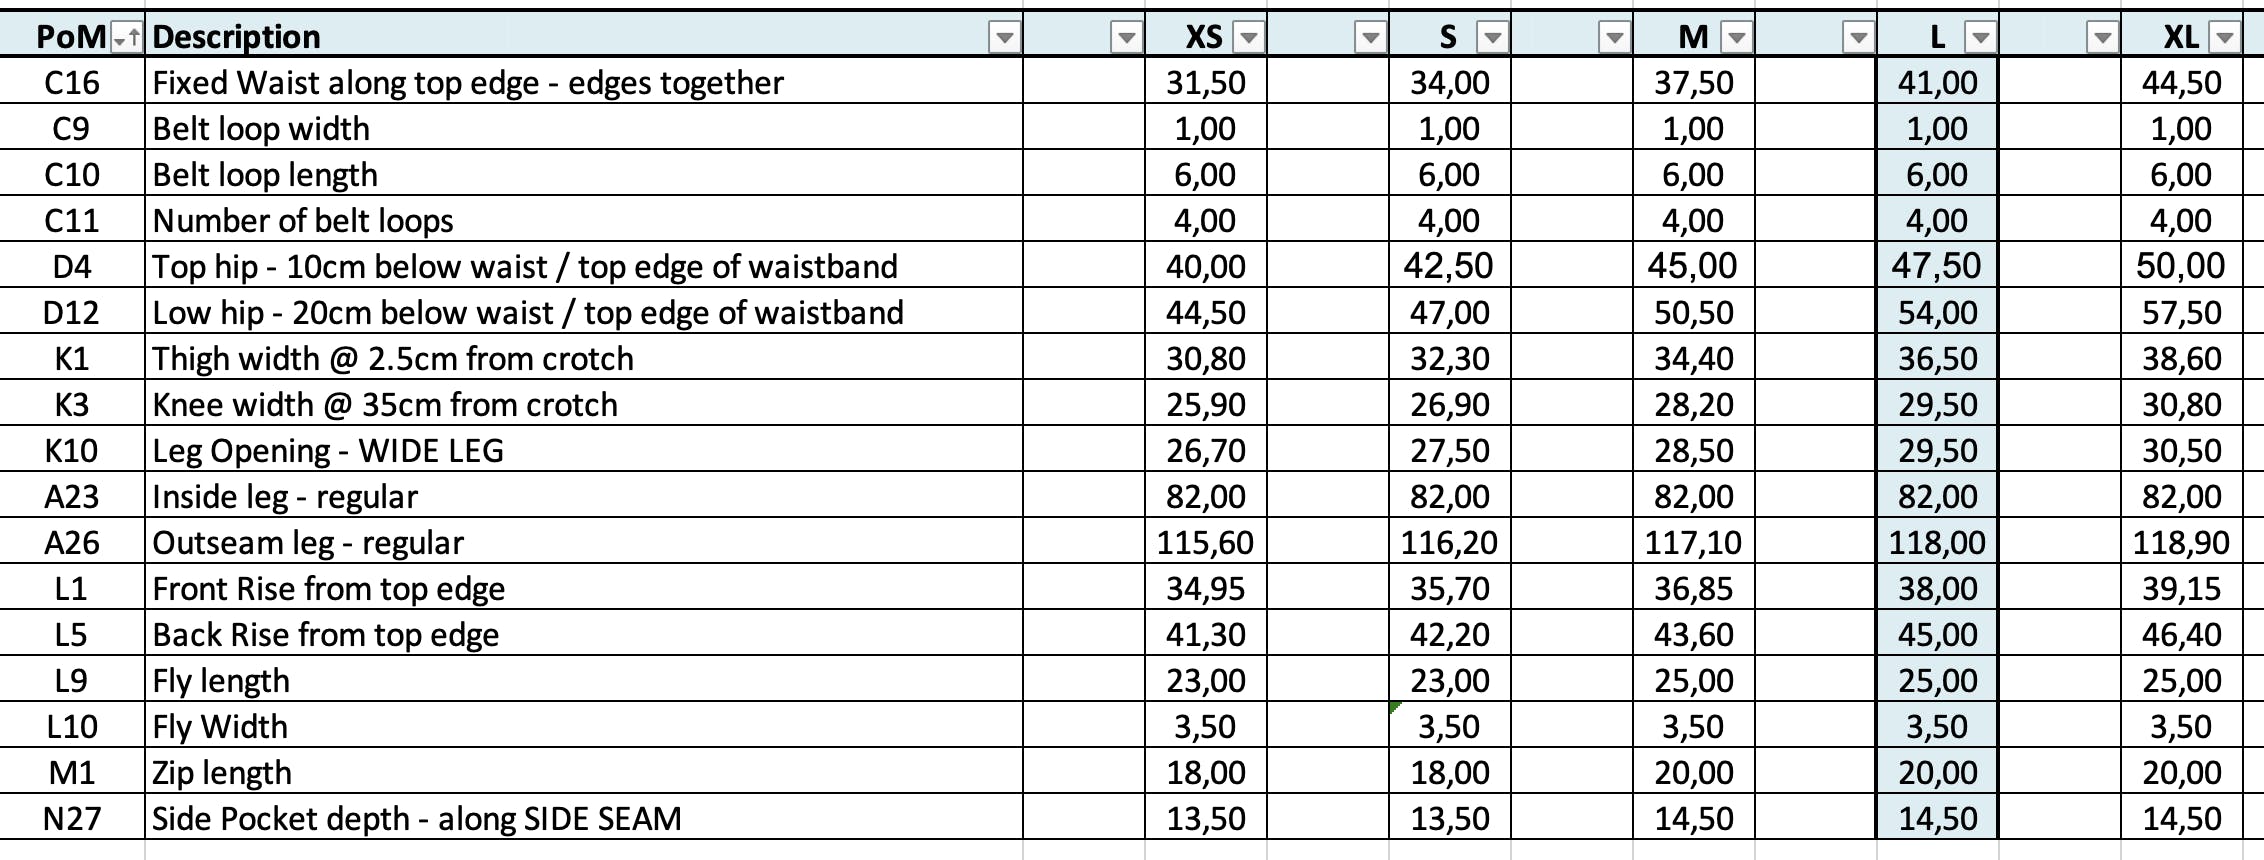 Graded Measurment table for pants example.png